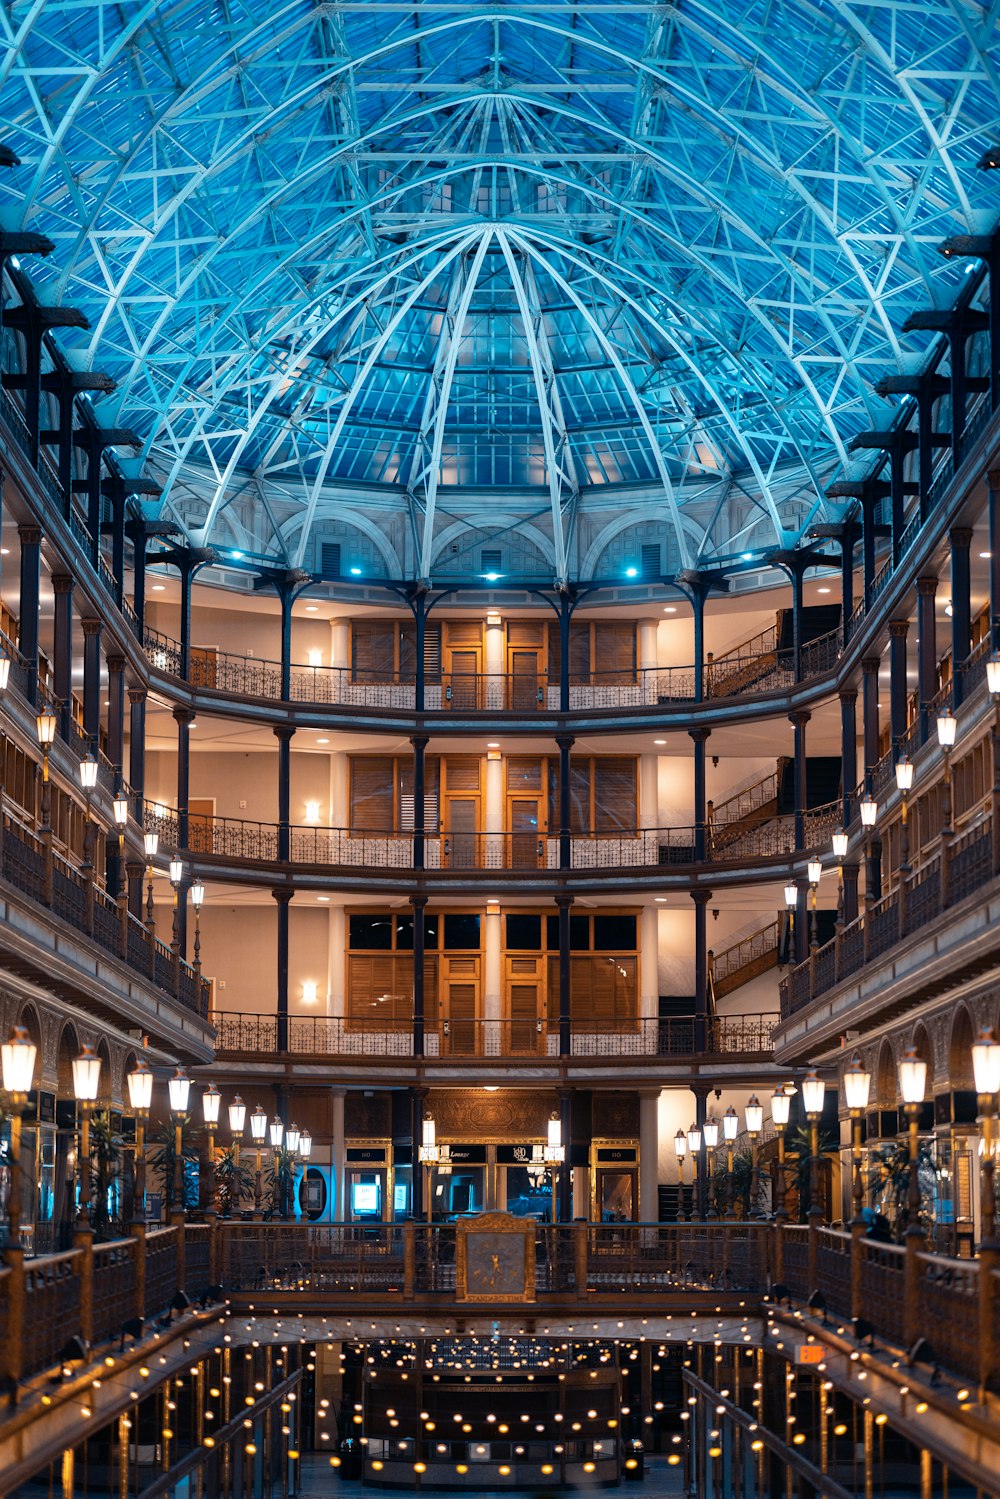 the inside of a large building with a glass ceiling